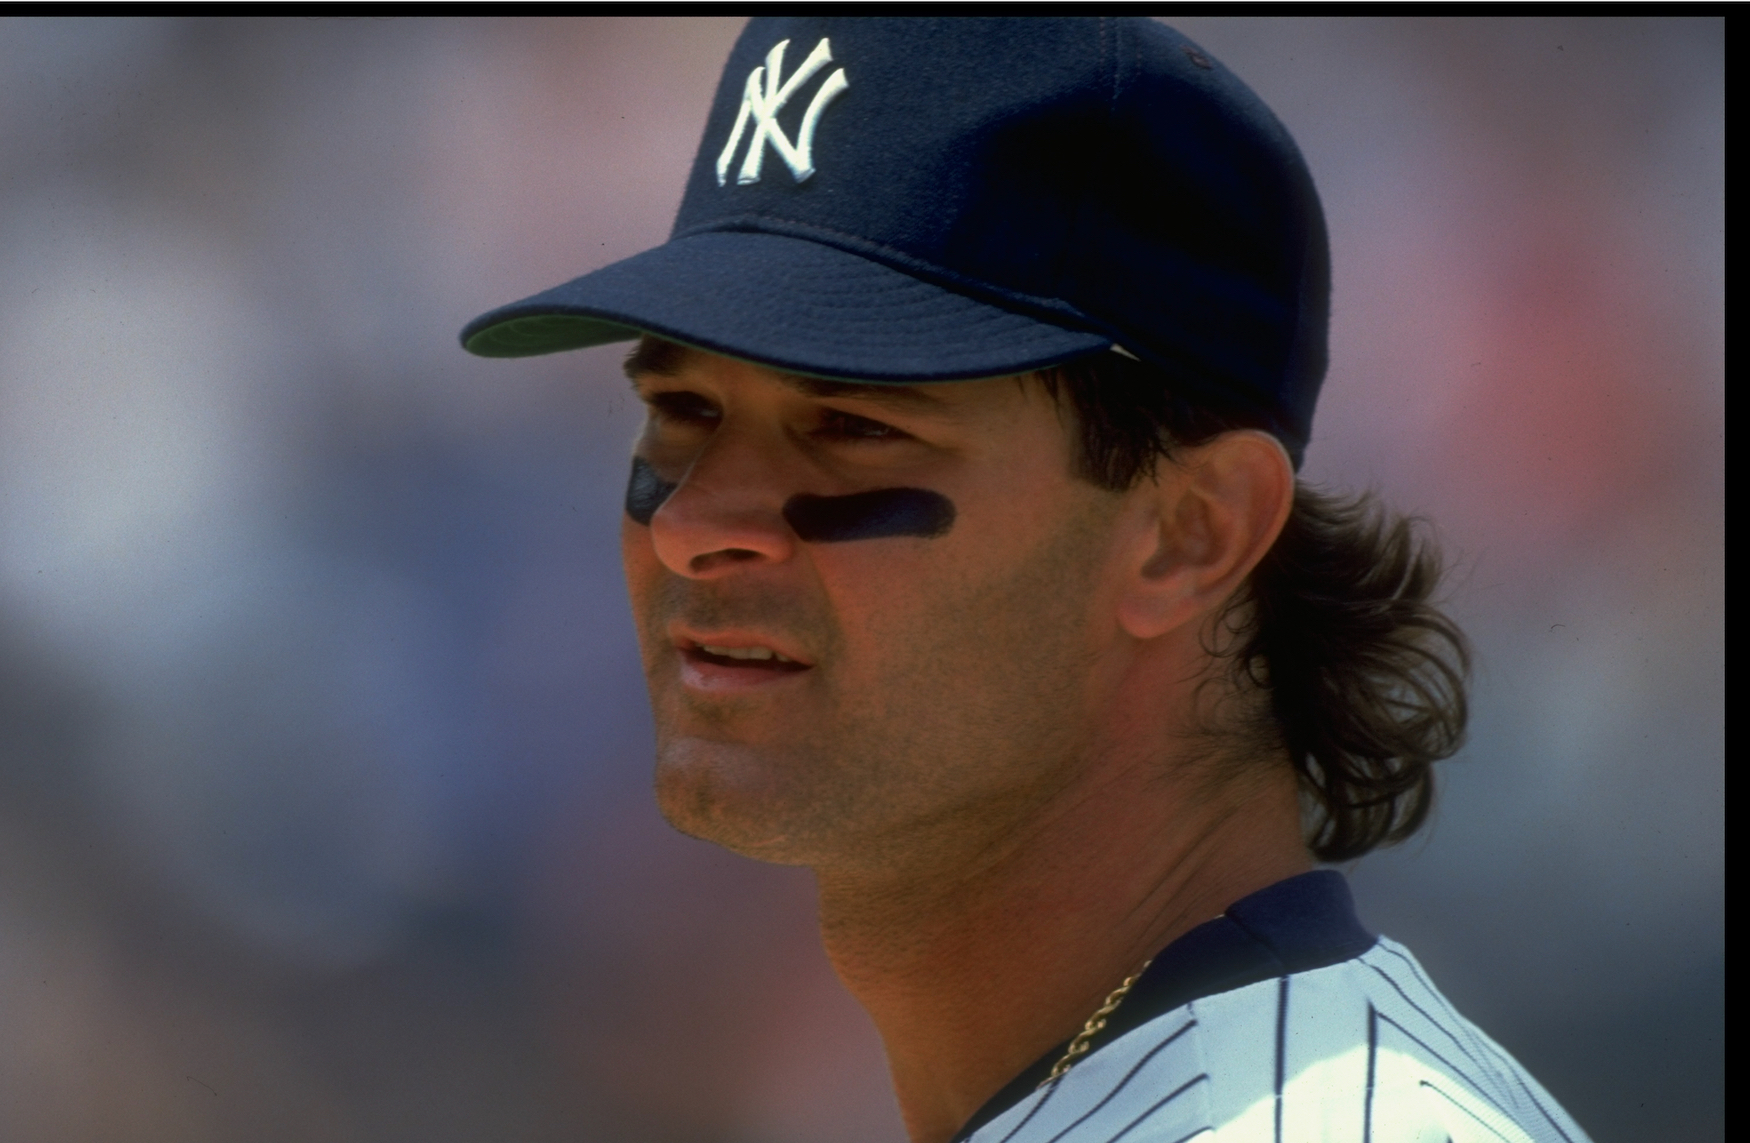 While Don Mattingly was a New York Yankees star, he still found himself in trouble after failing to get a haircut.